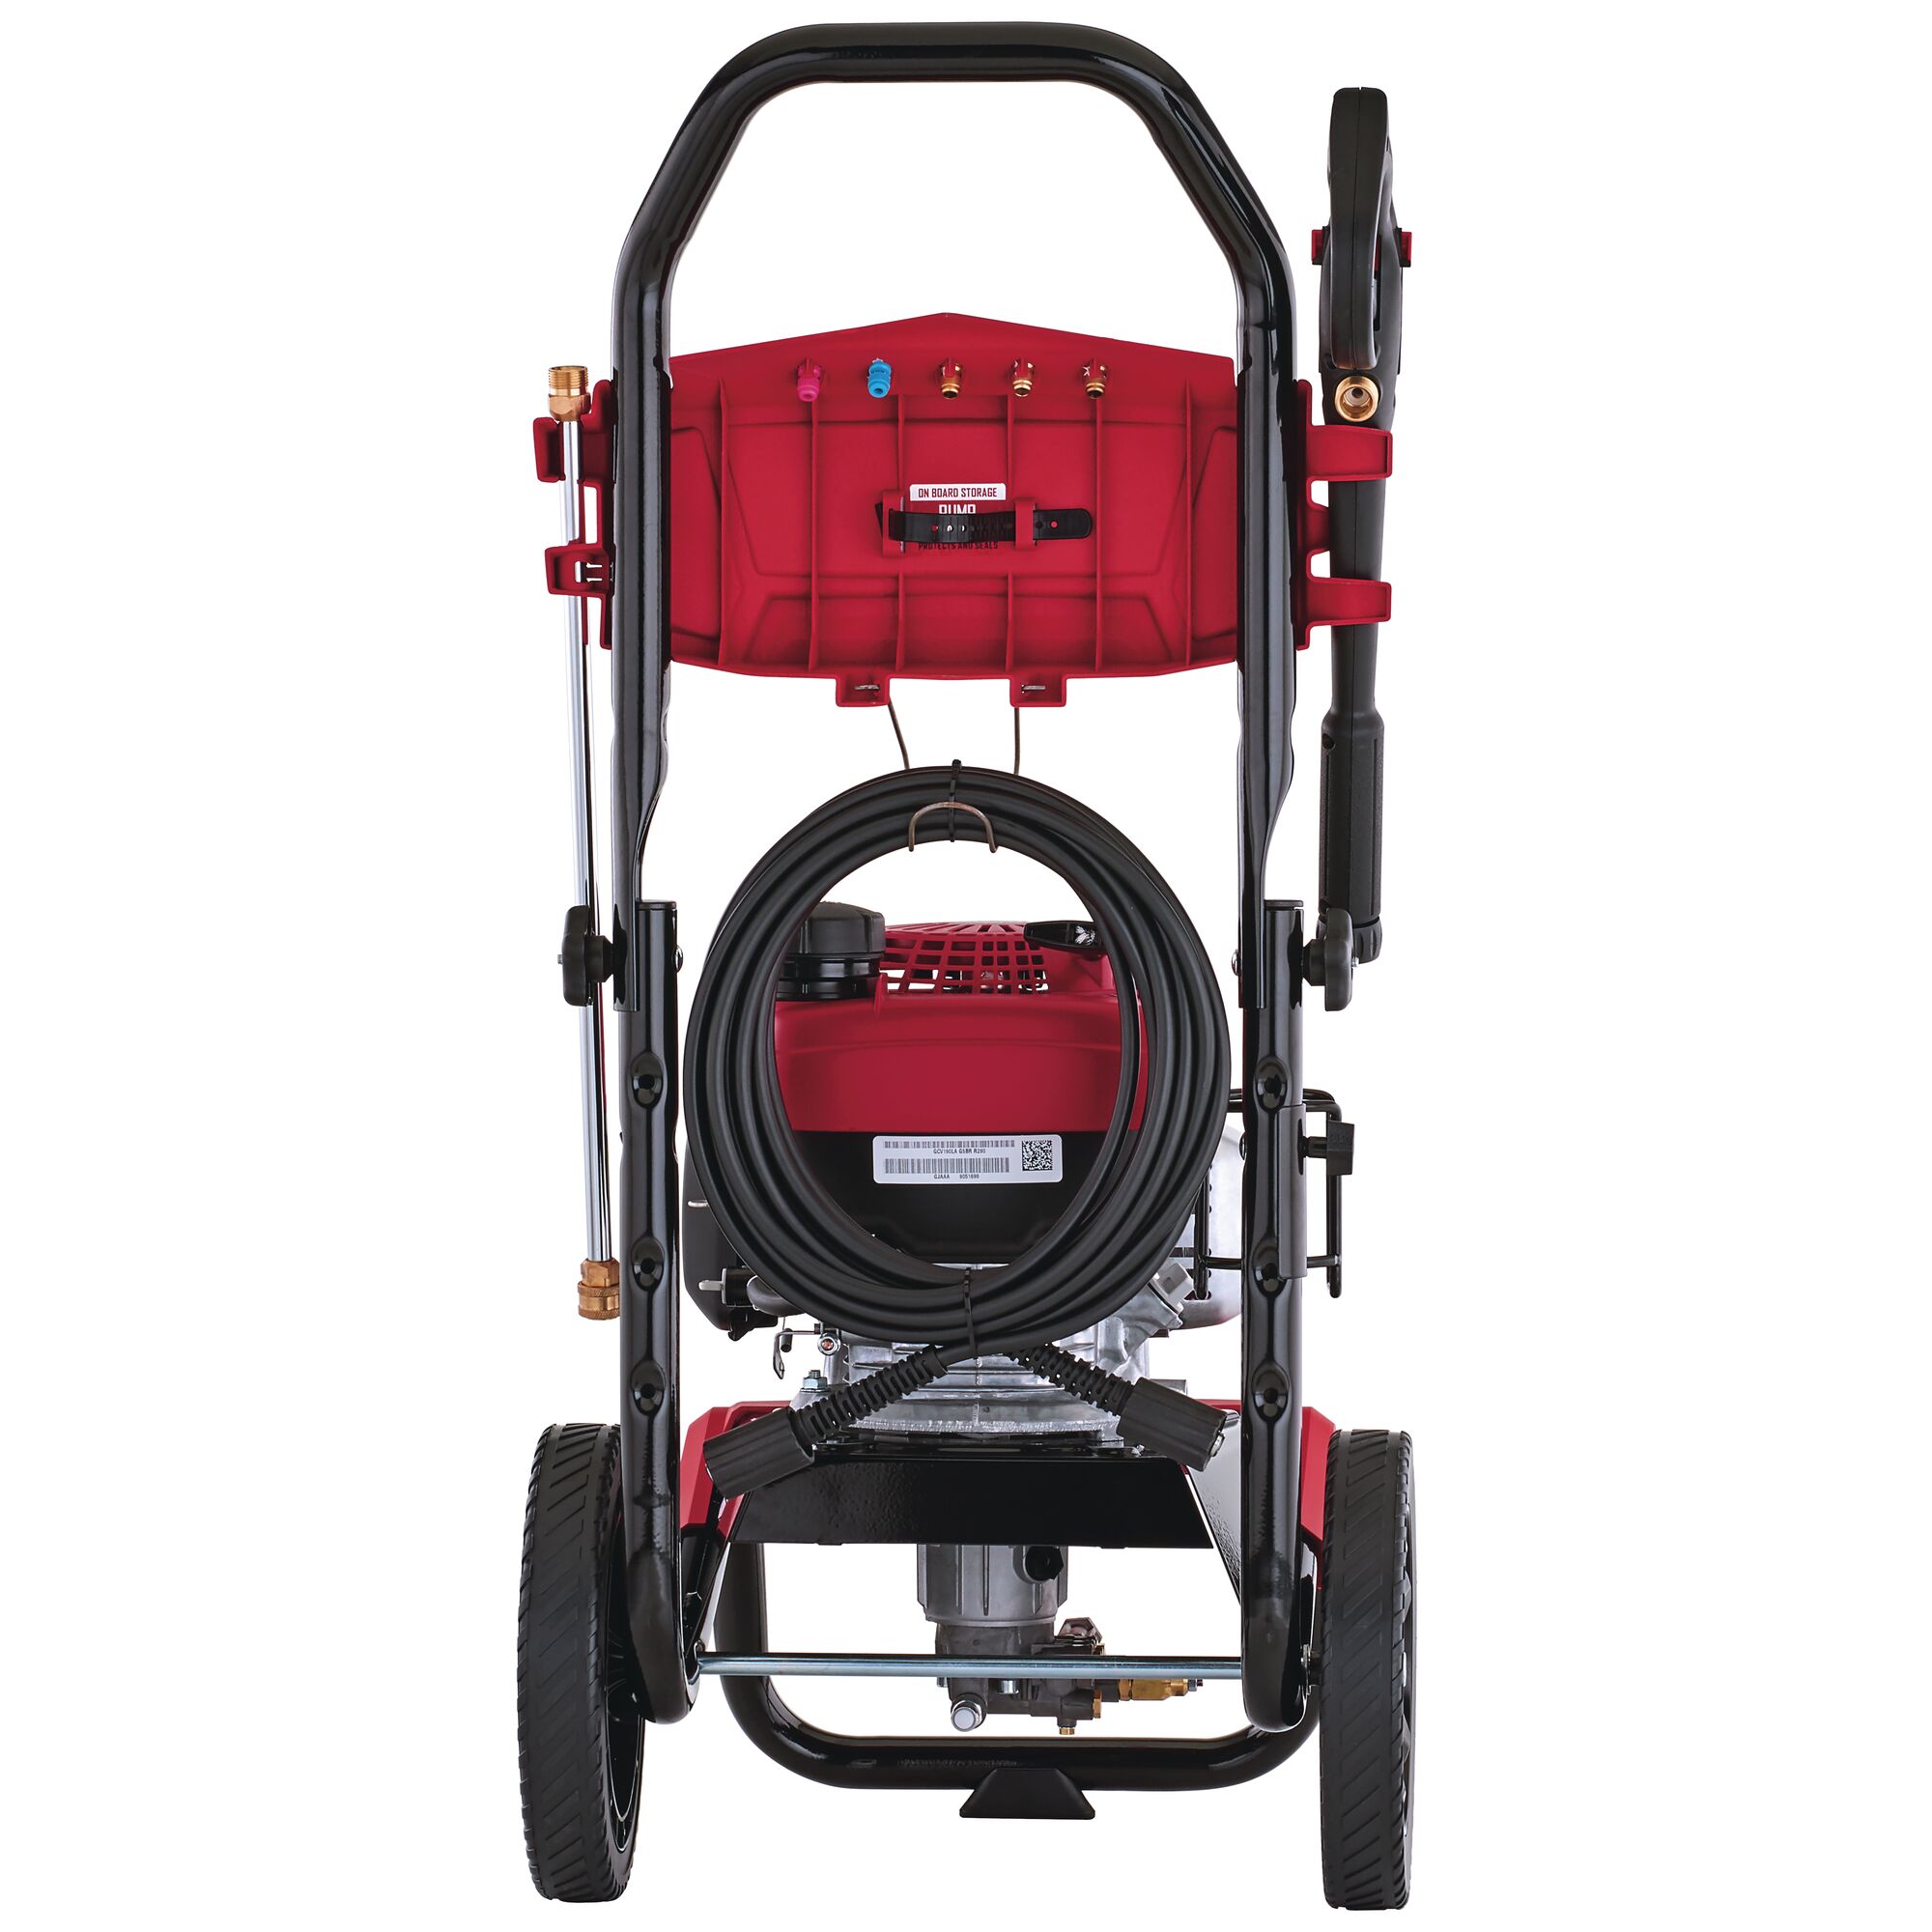 Backside of 3100 MAX Pounds per Square Inch or 2 and seven tenths MAX Gallons Per Minute Pressure Washer.